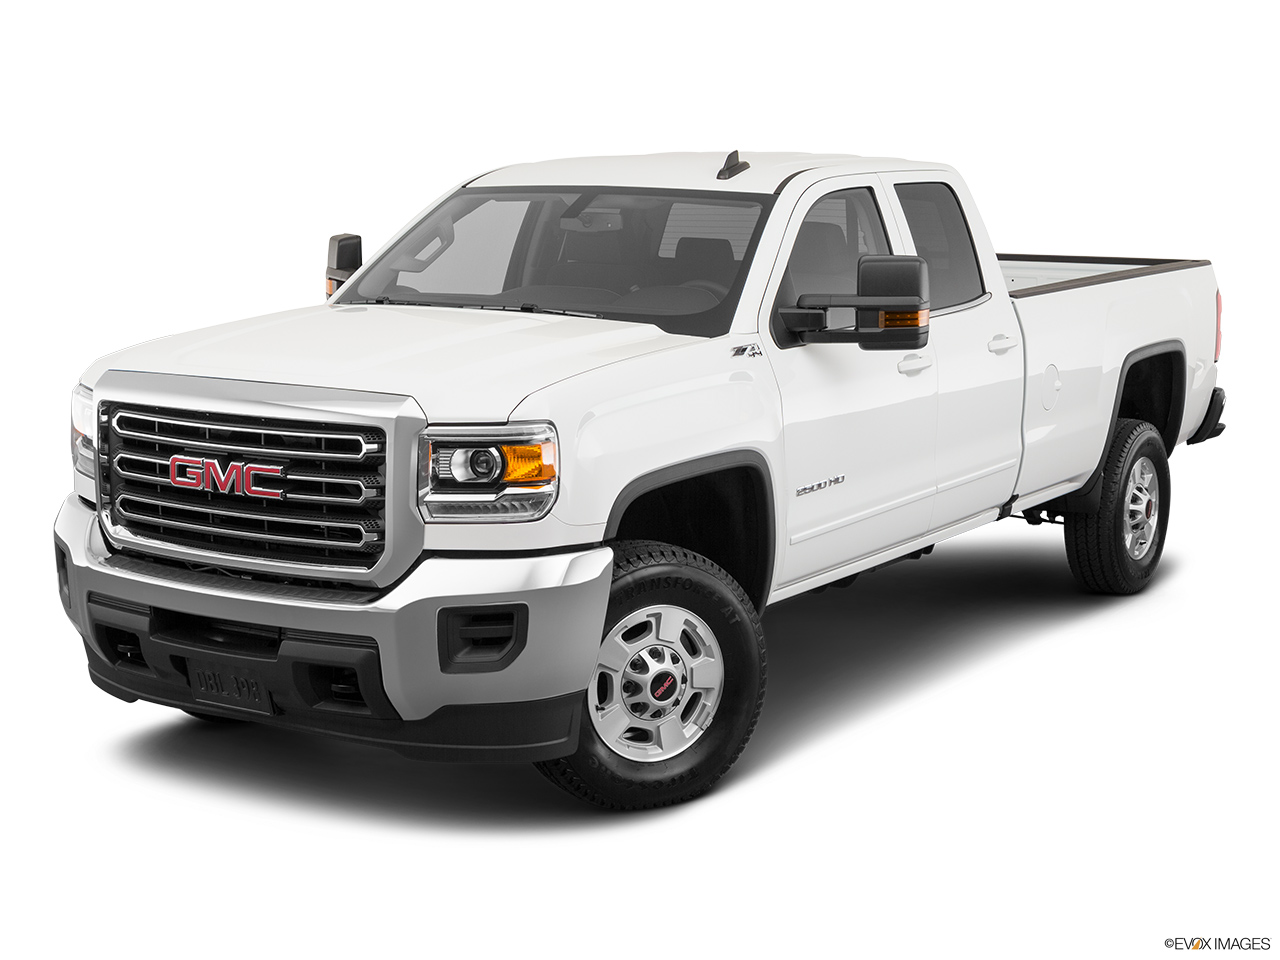 2019 GMC Sierra 2500HD SLE Front angle view. 